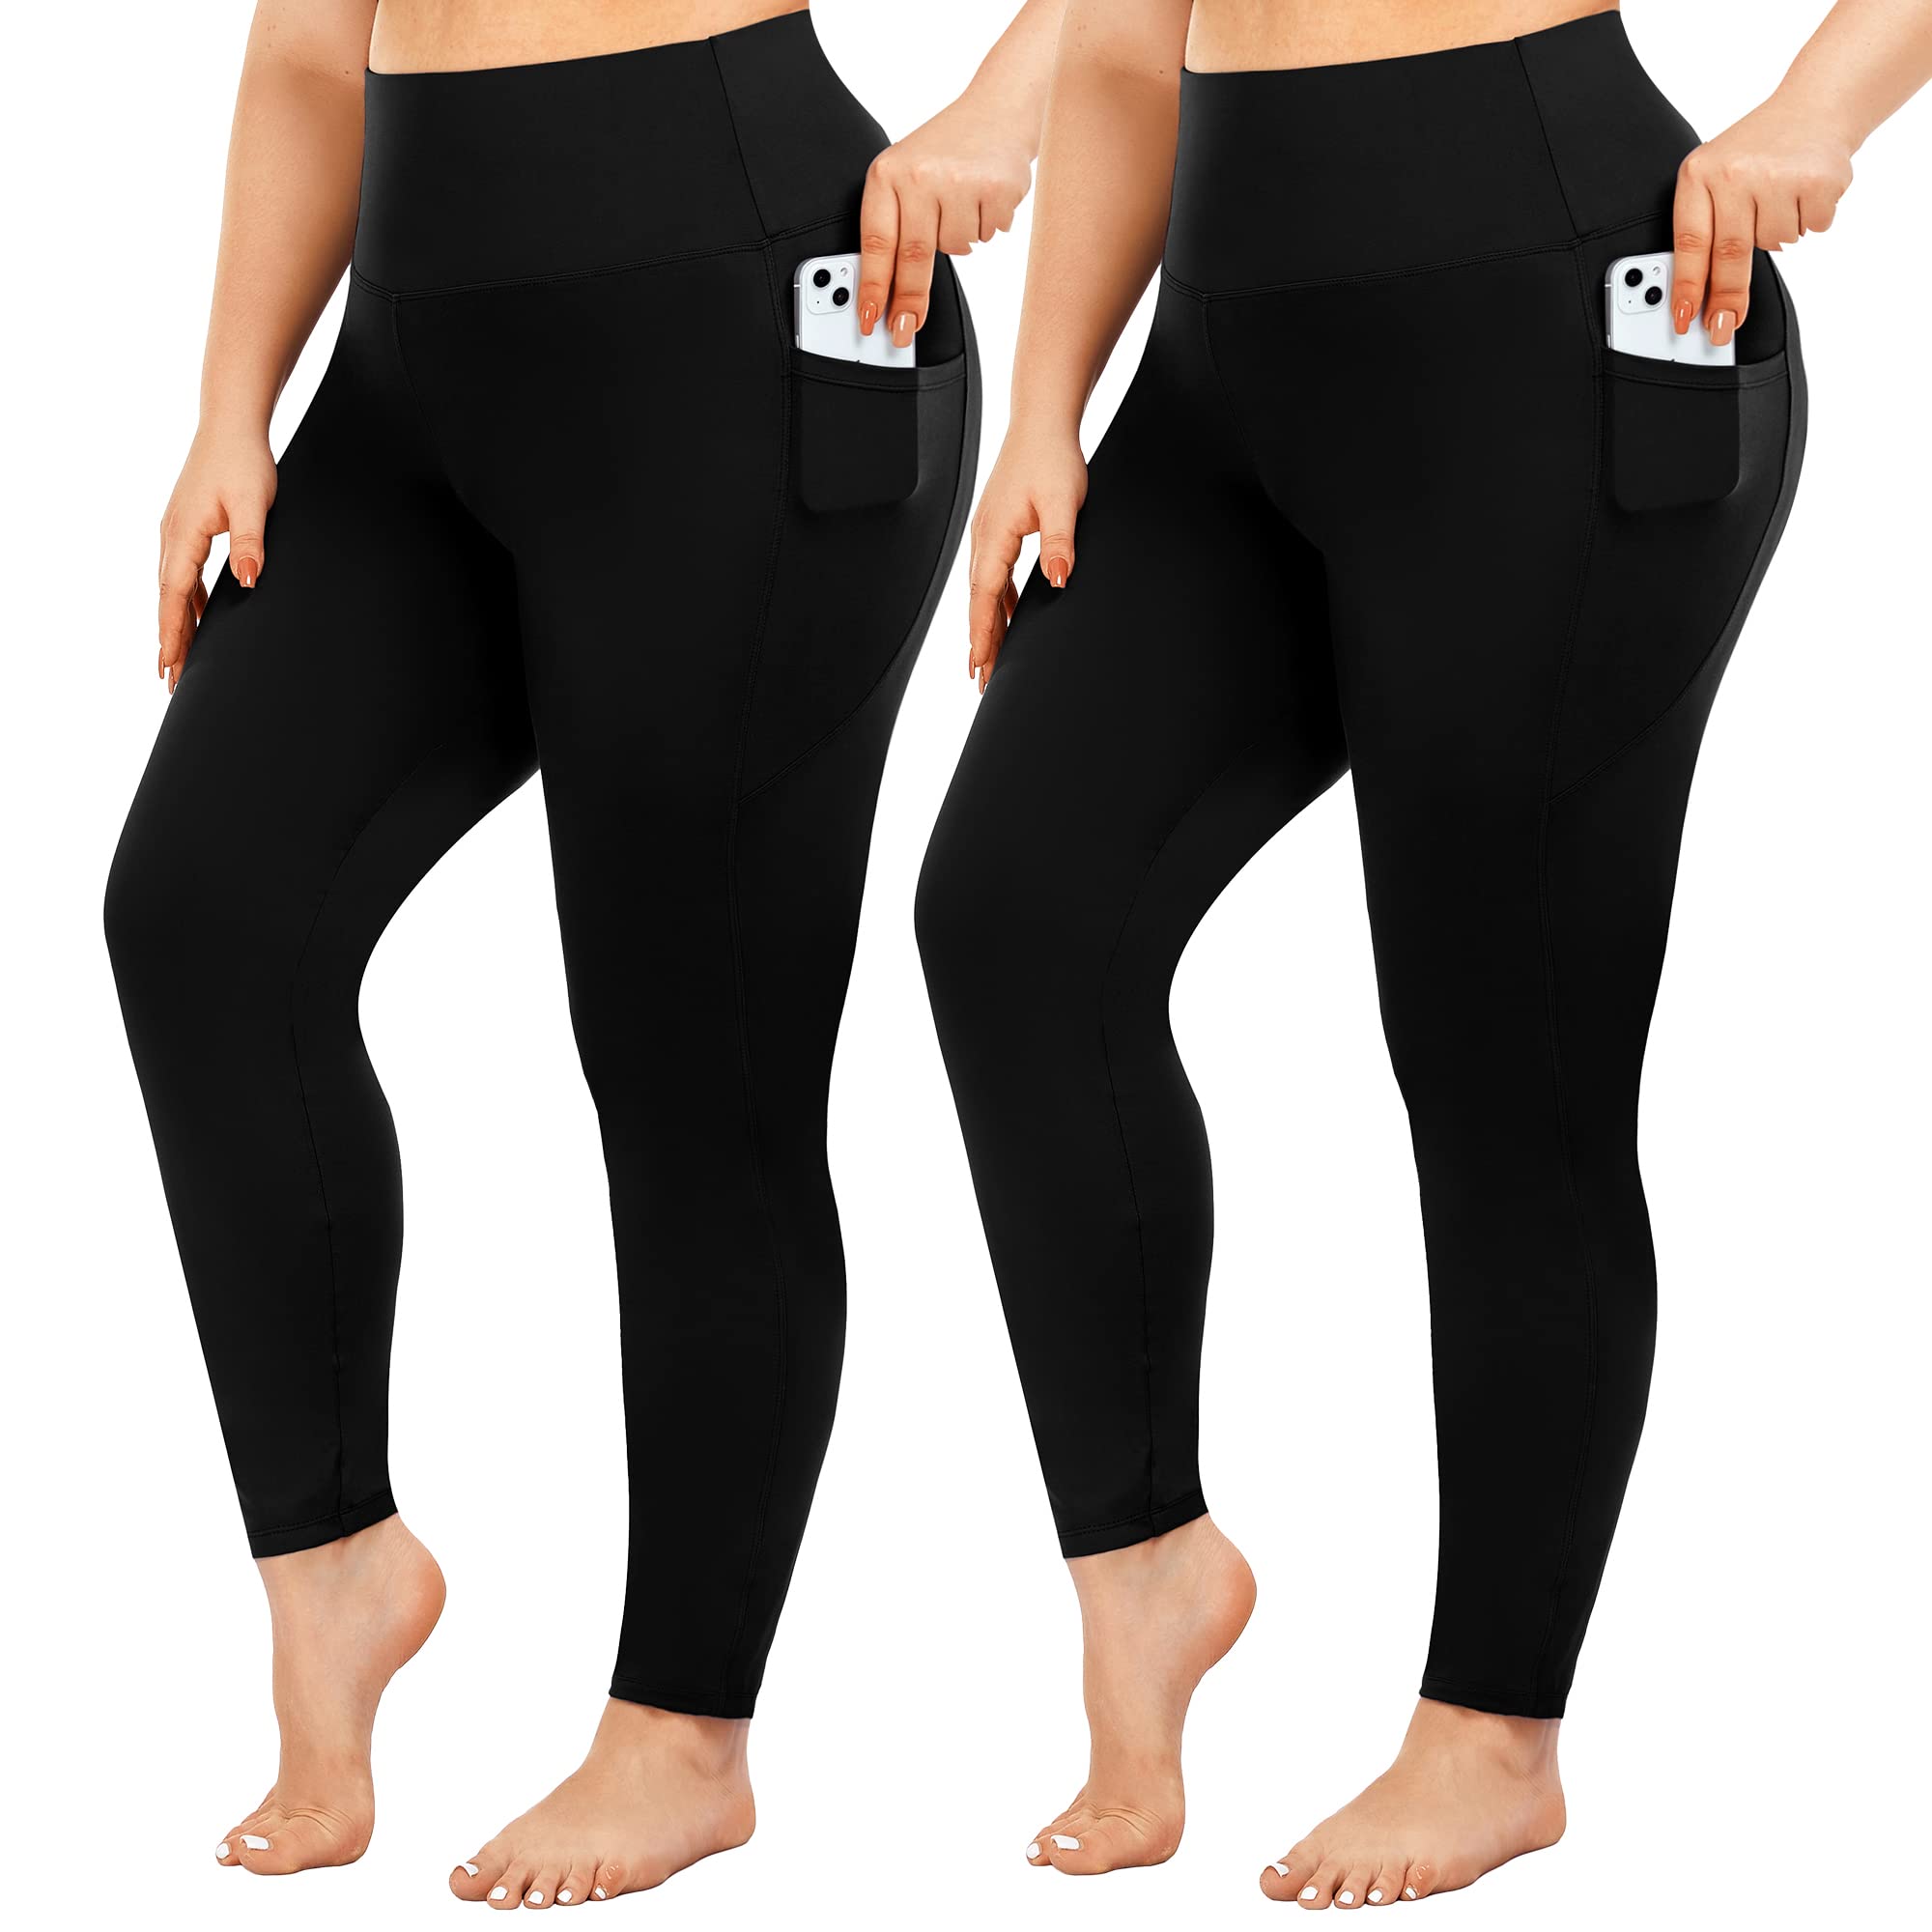 yeuG Women's Plus Size Leggings with Pocket-2 Pack High Waist